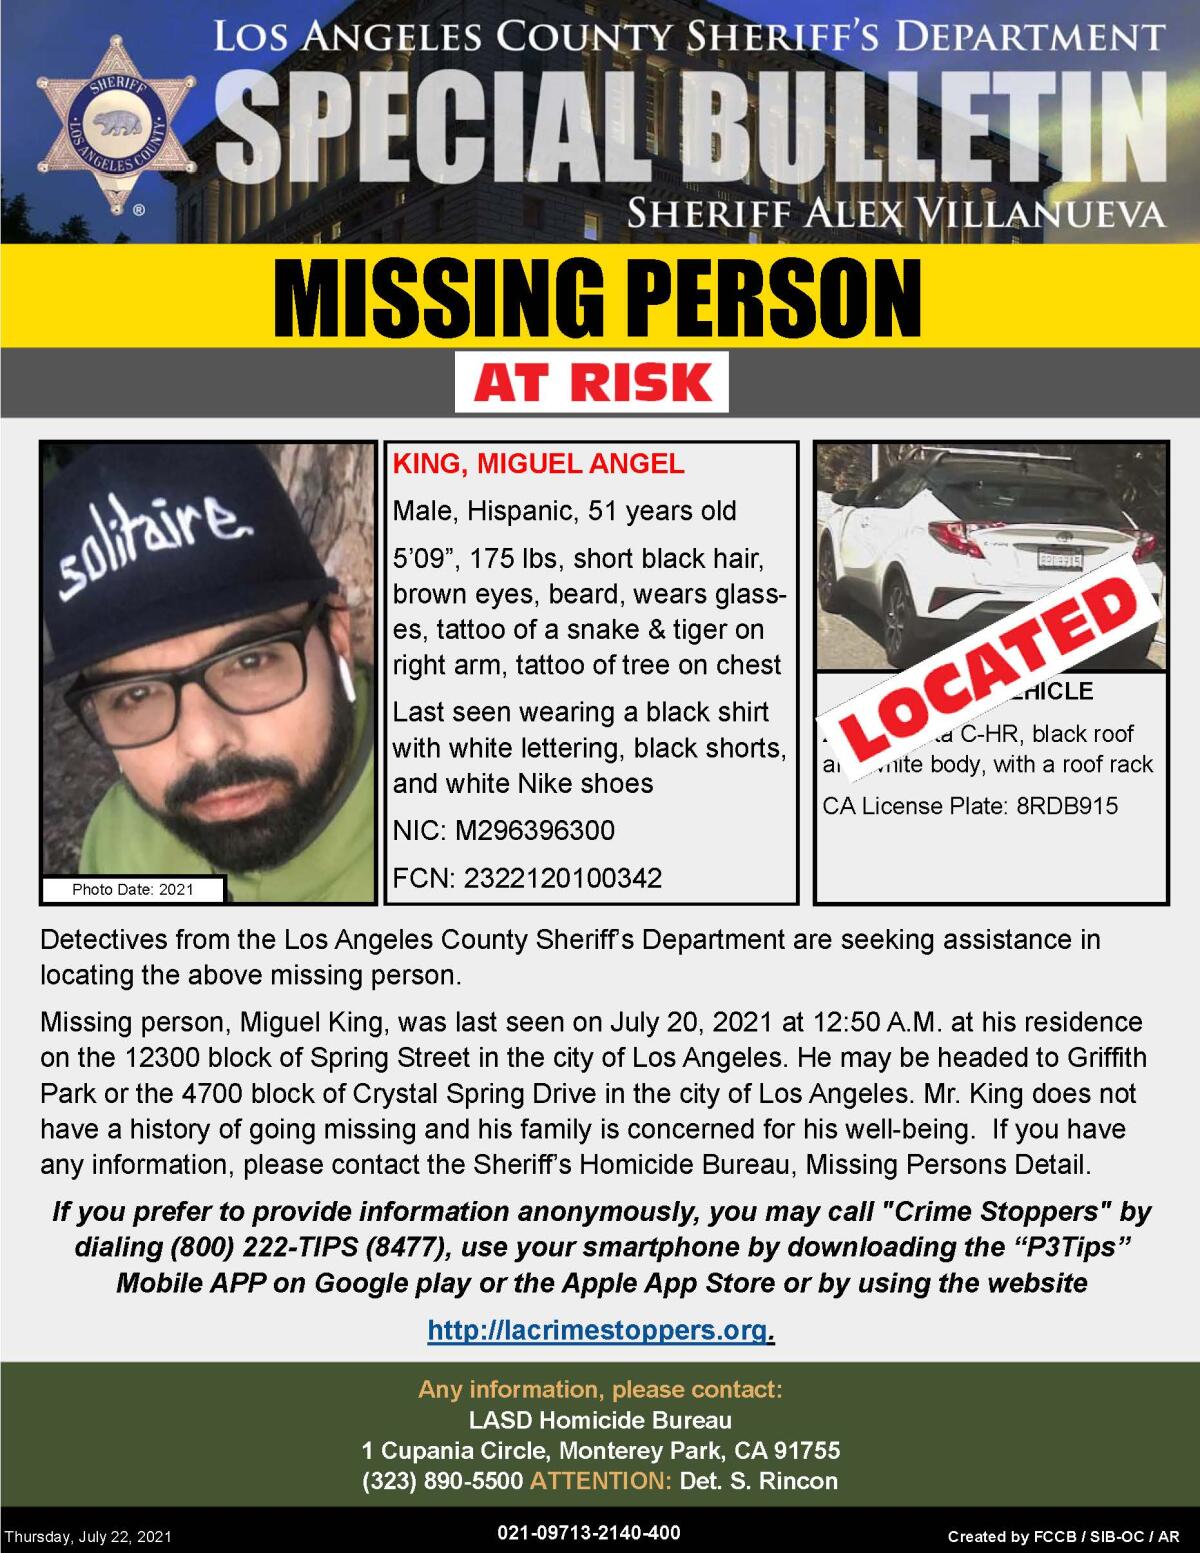 A poster for Miguel Angel King, who is missing